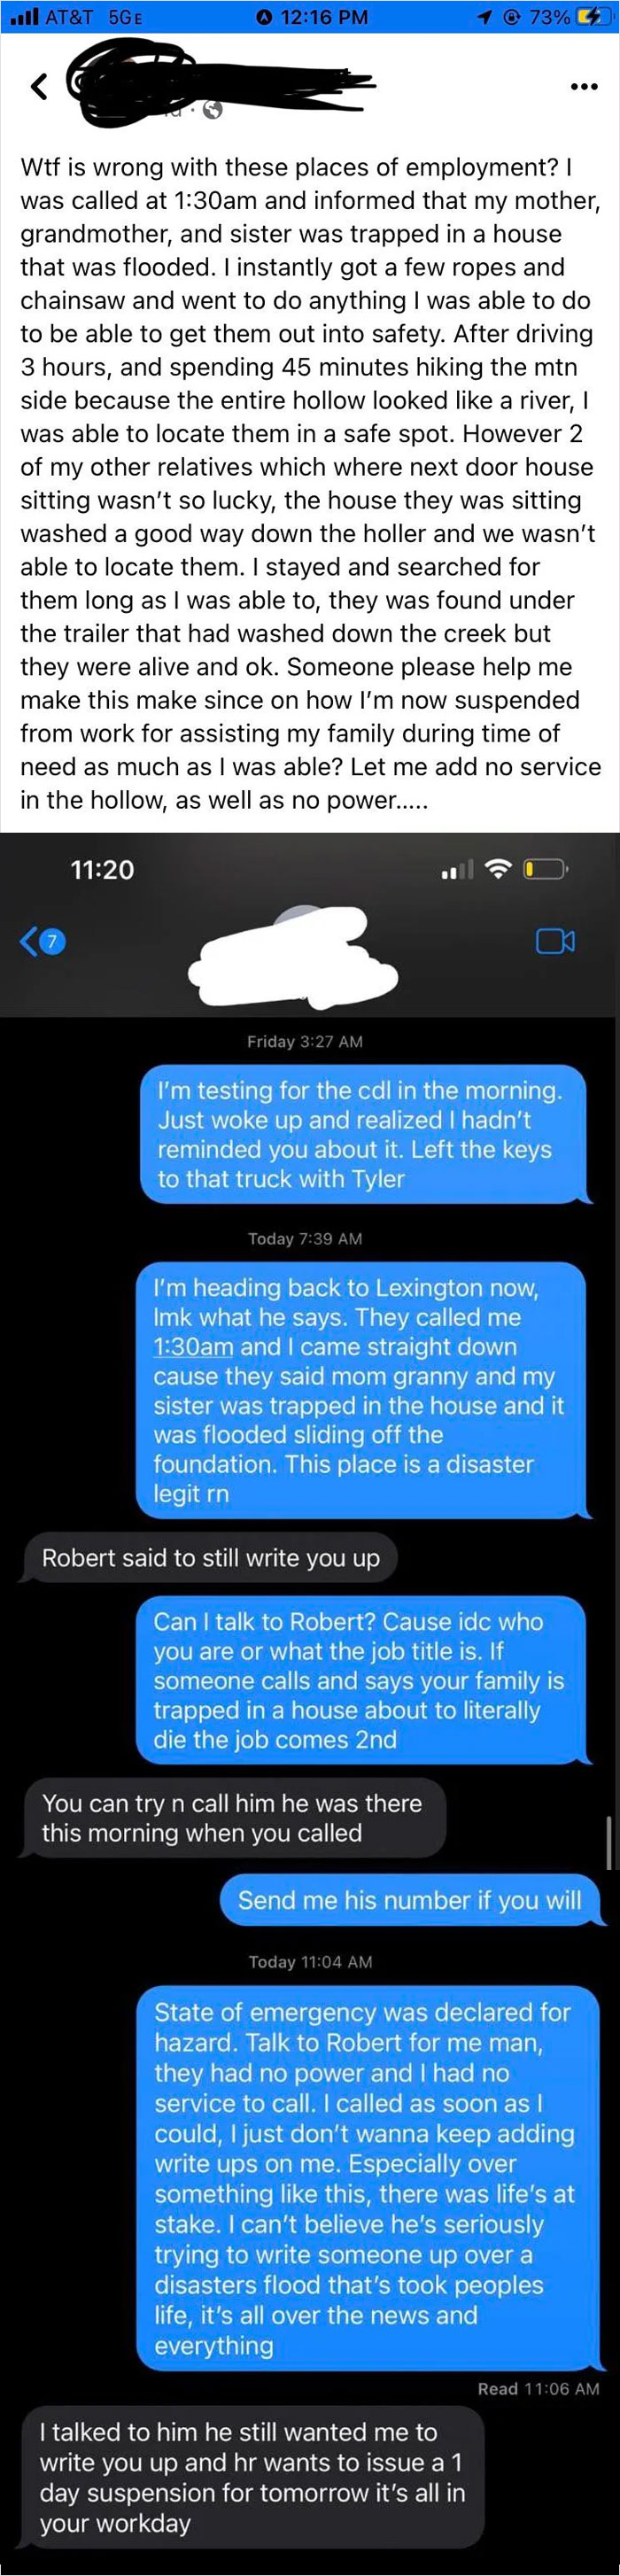 Found On Facebook. Someone From My Town Got Written Up, Suspended For A Day For Helping Save His Family From Eastern Kentucky Flood